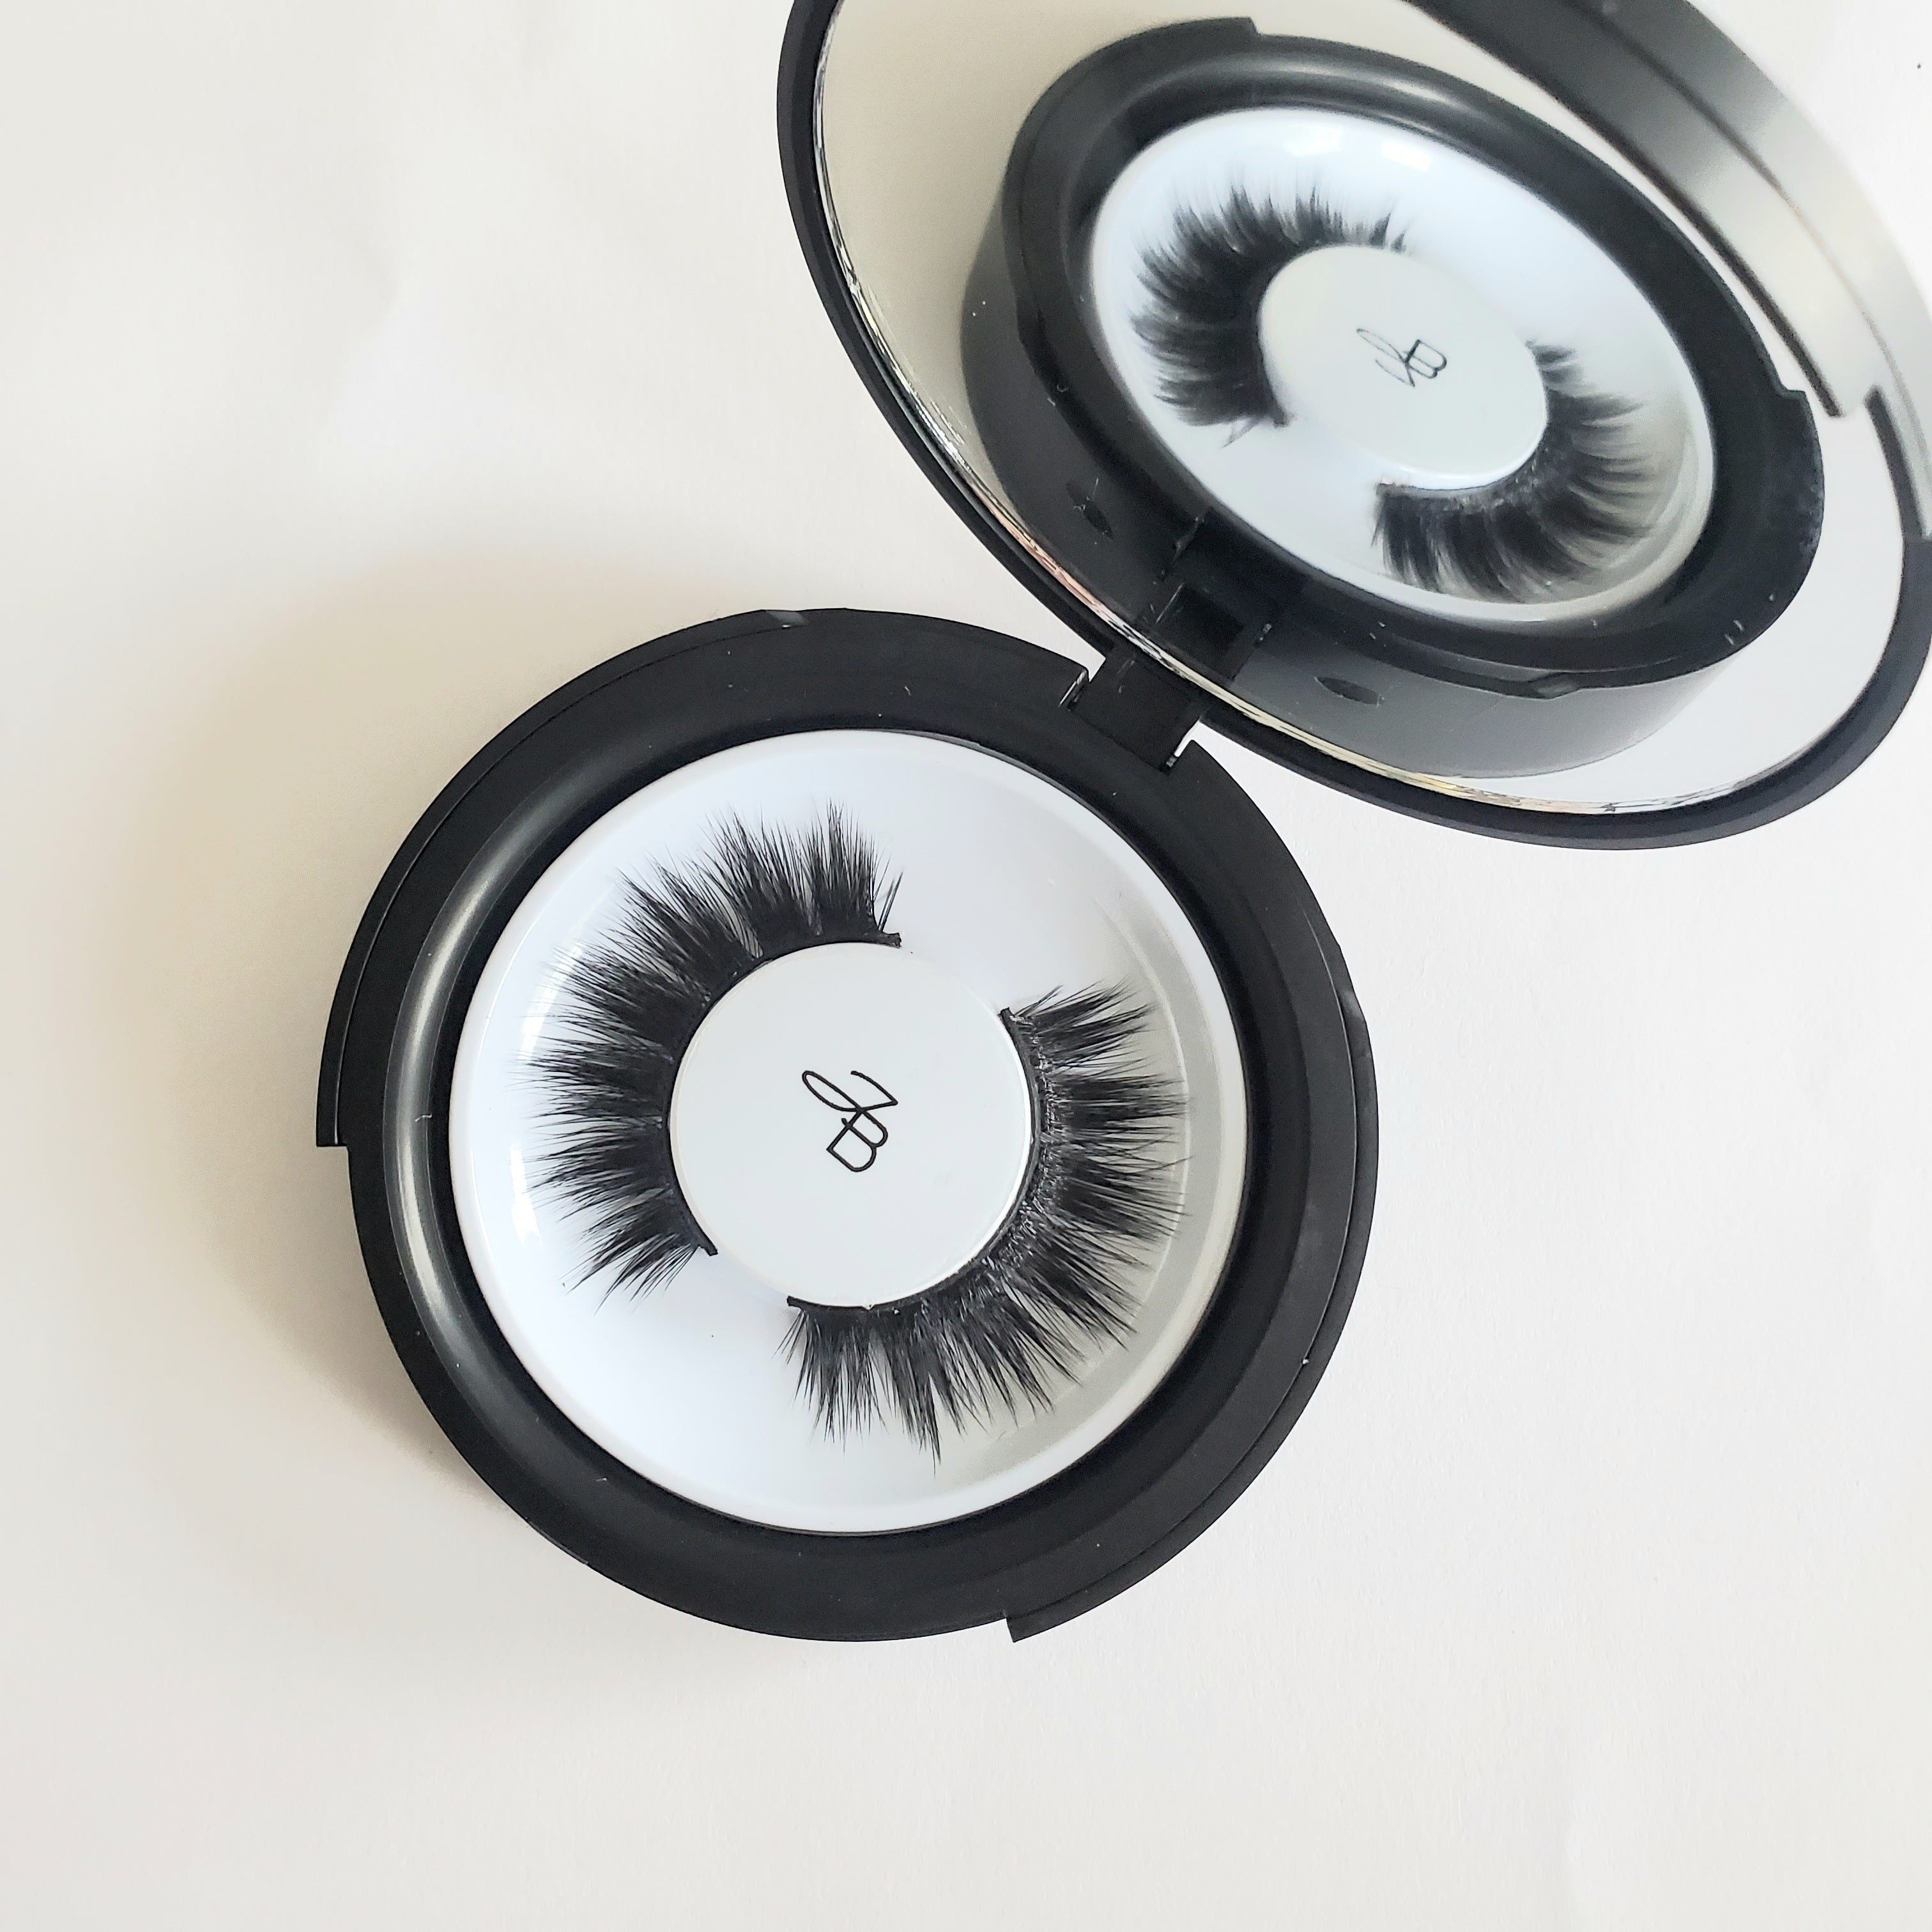 3D faux mink Lashes in mirrored compact